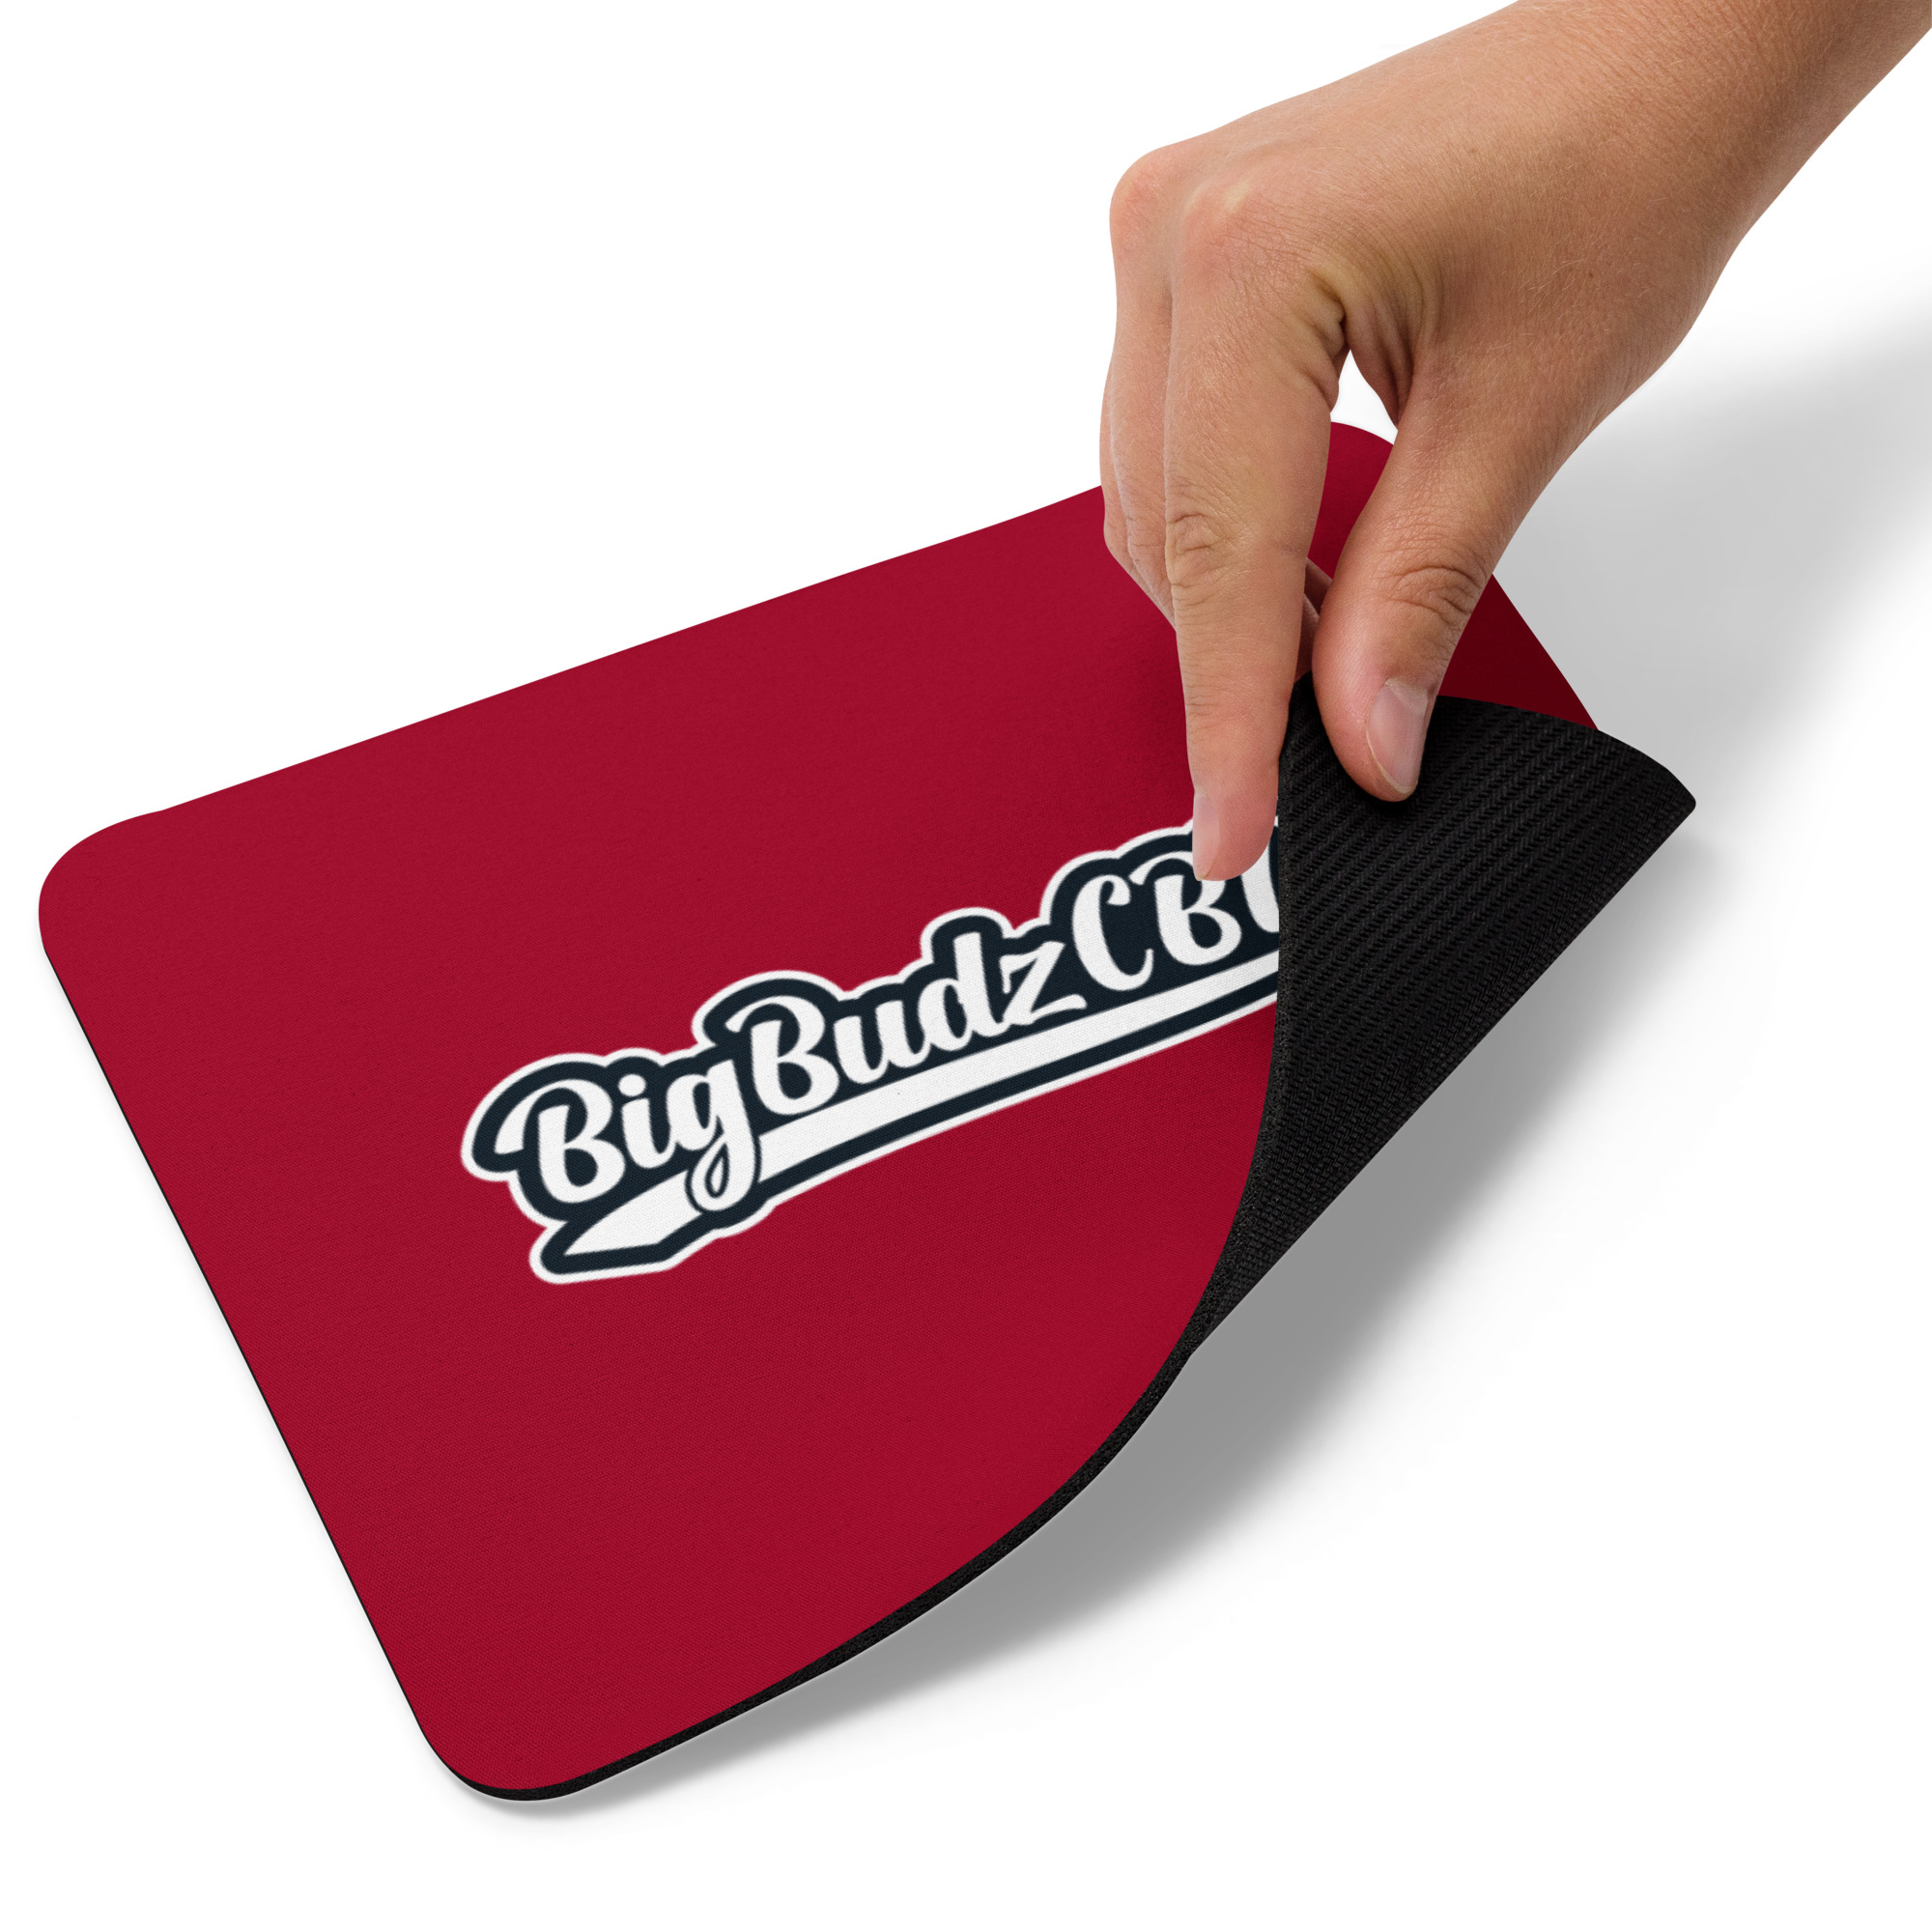 mouse-pad-white-product-details-659c816825ee1.jpg